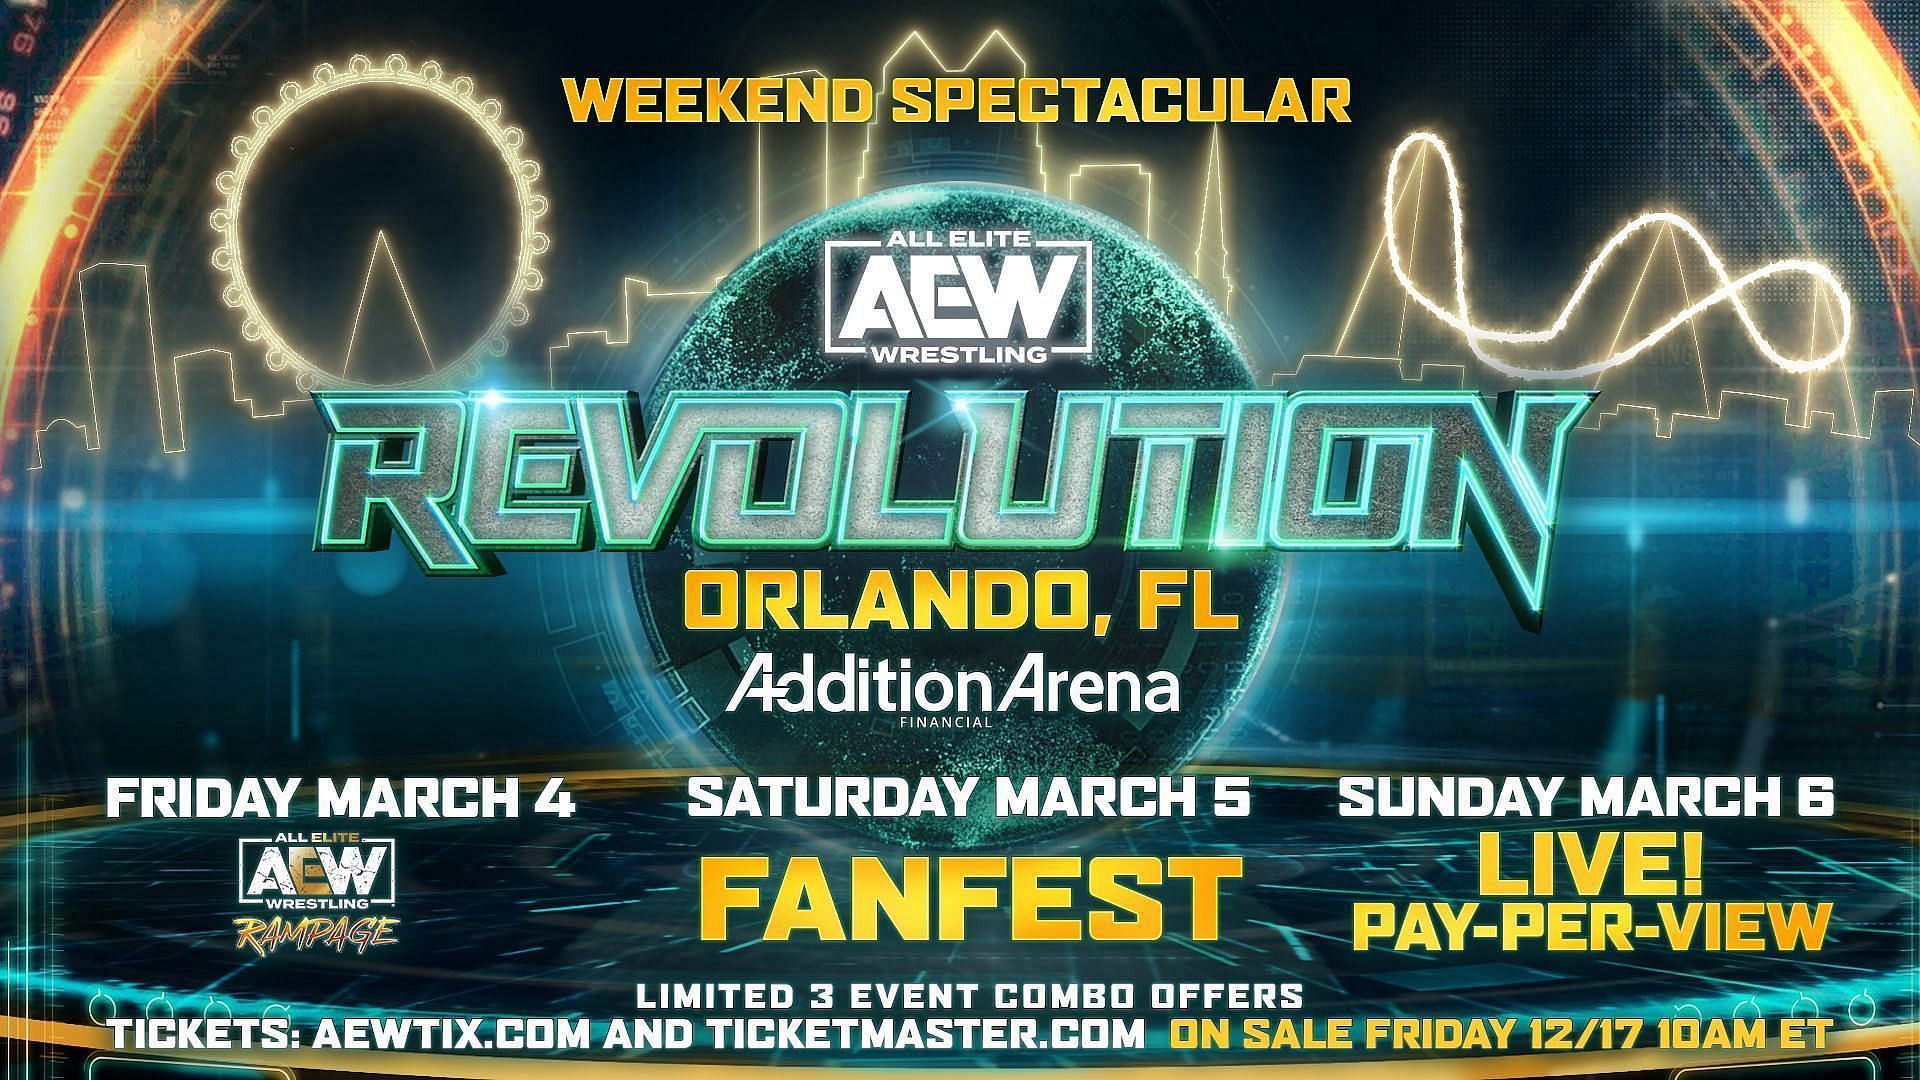 AEW Revolution 2022 will take place live on Sunday, March 6